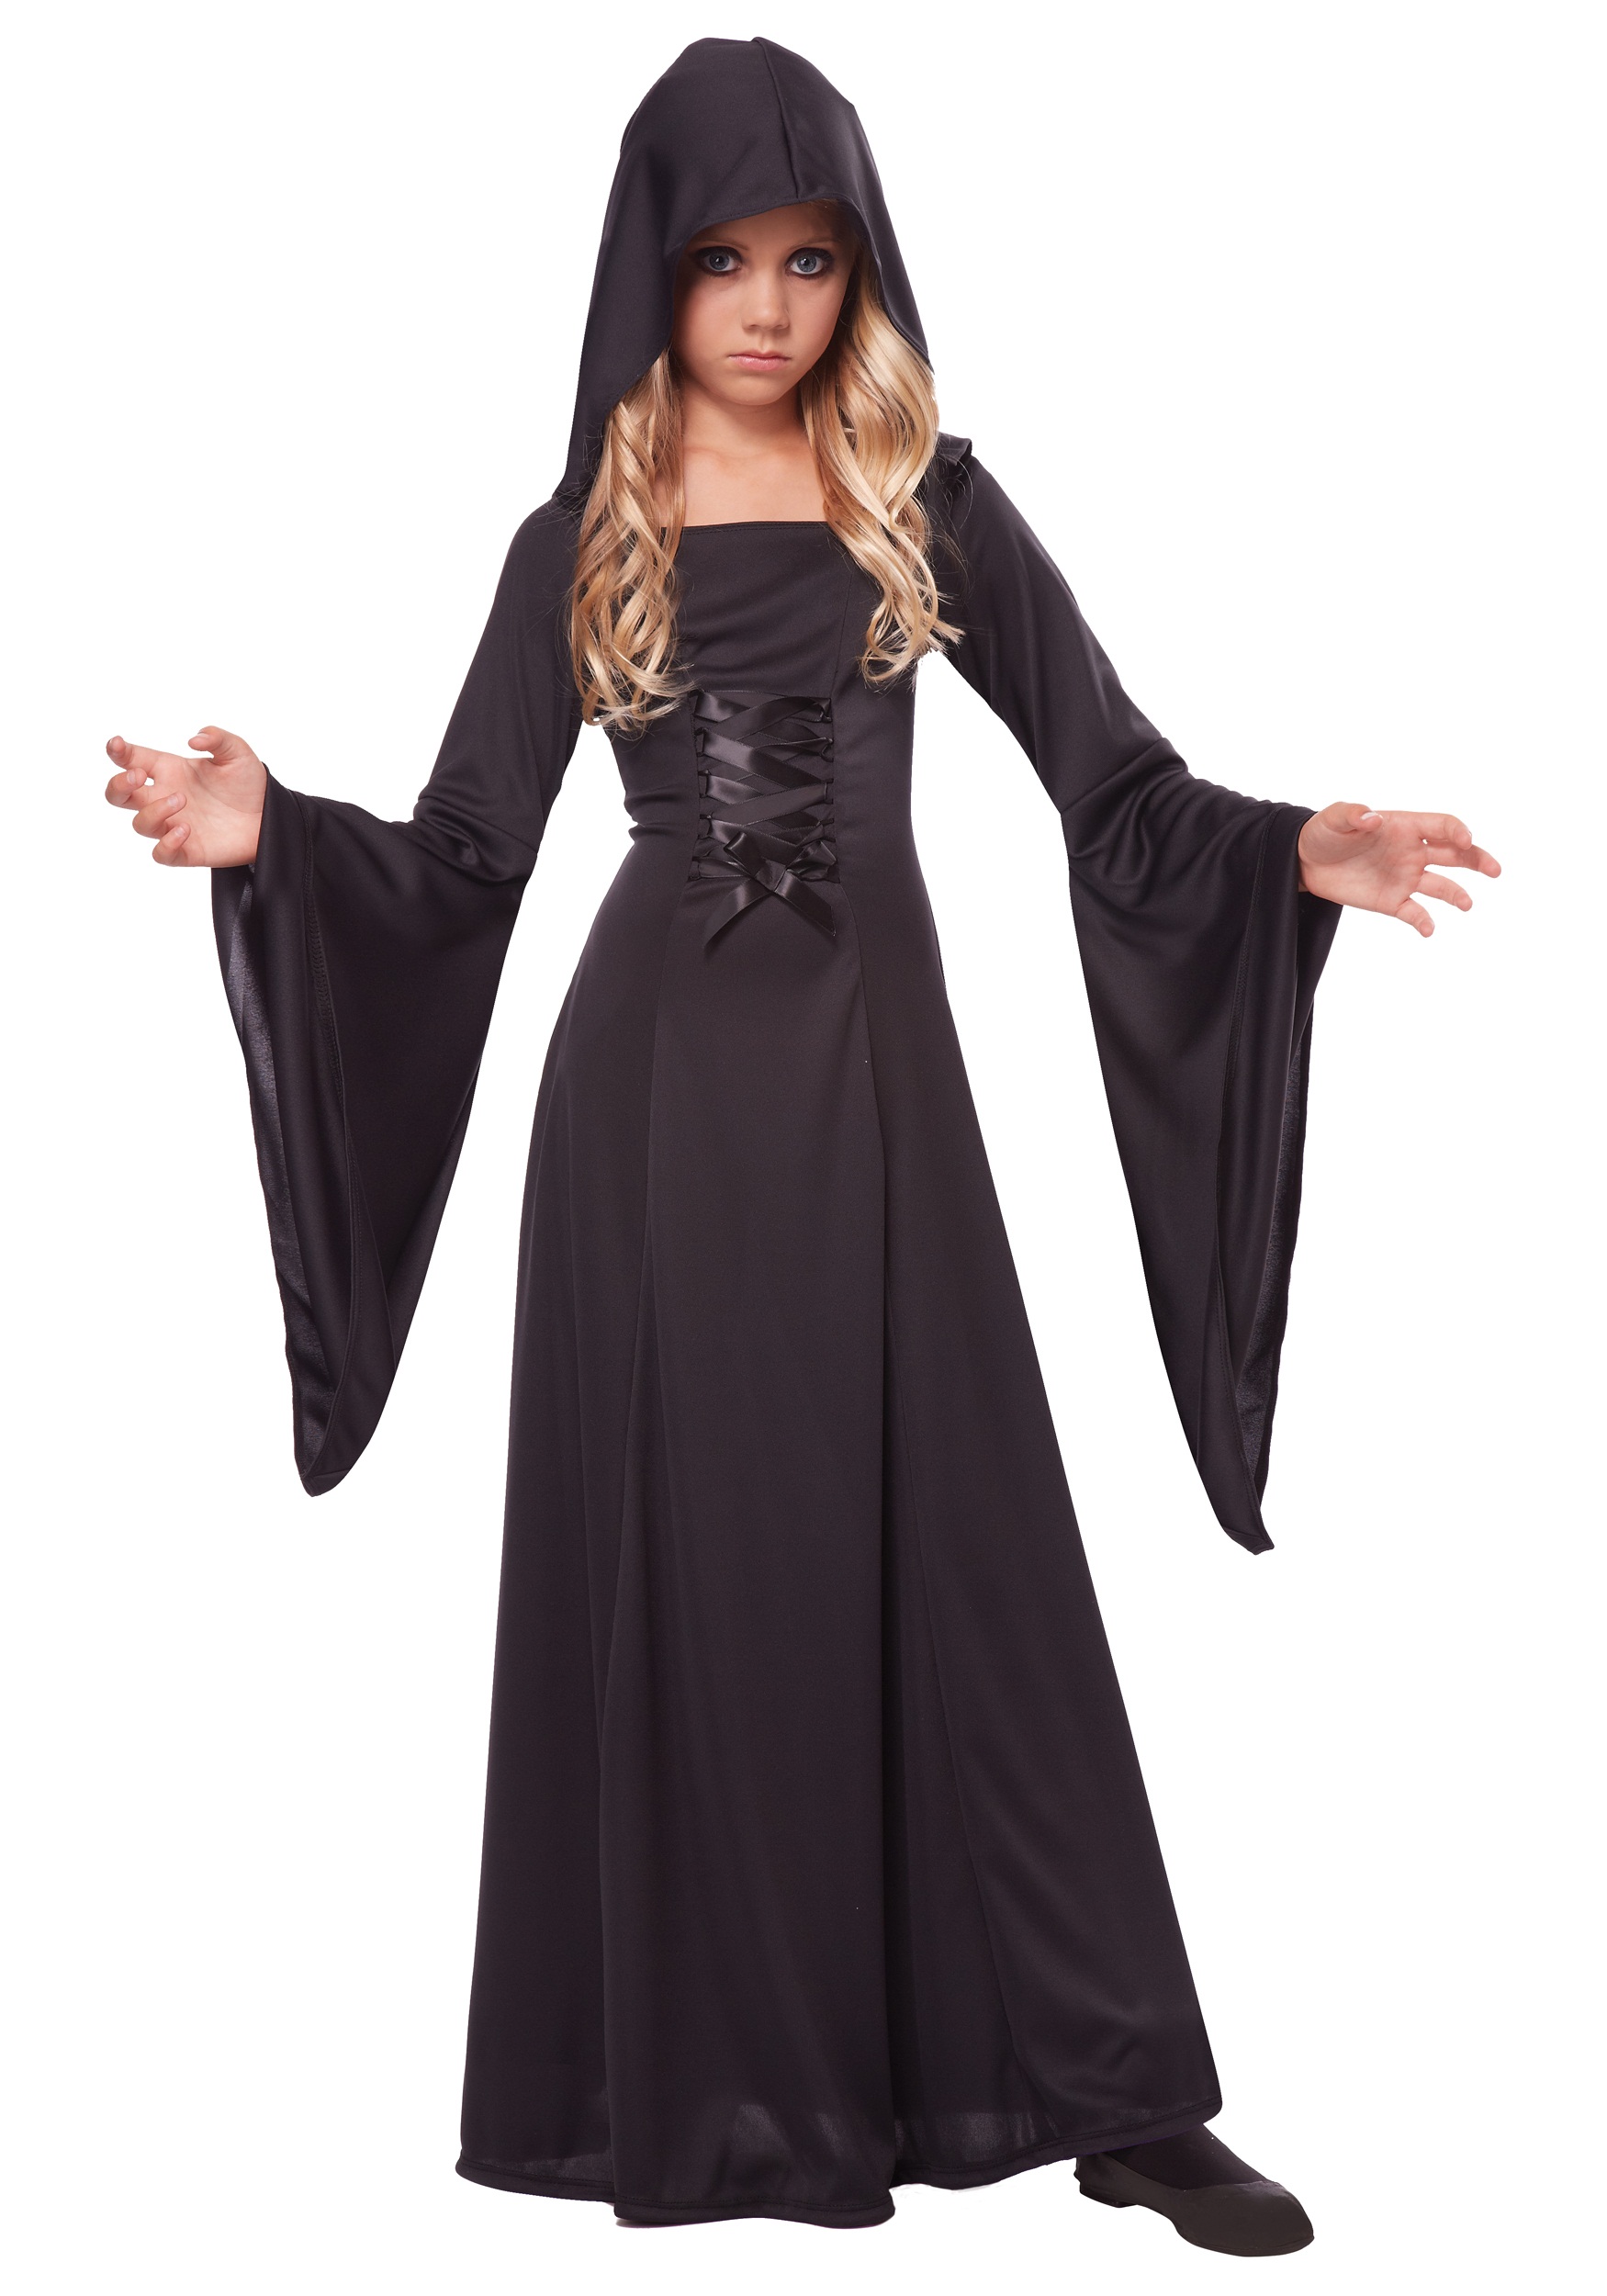 Childs Boy's Grim Reaper Hooded Horror Death Robe Costume Large 12-14